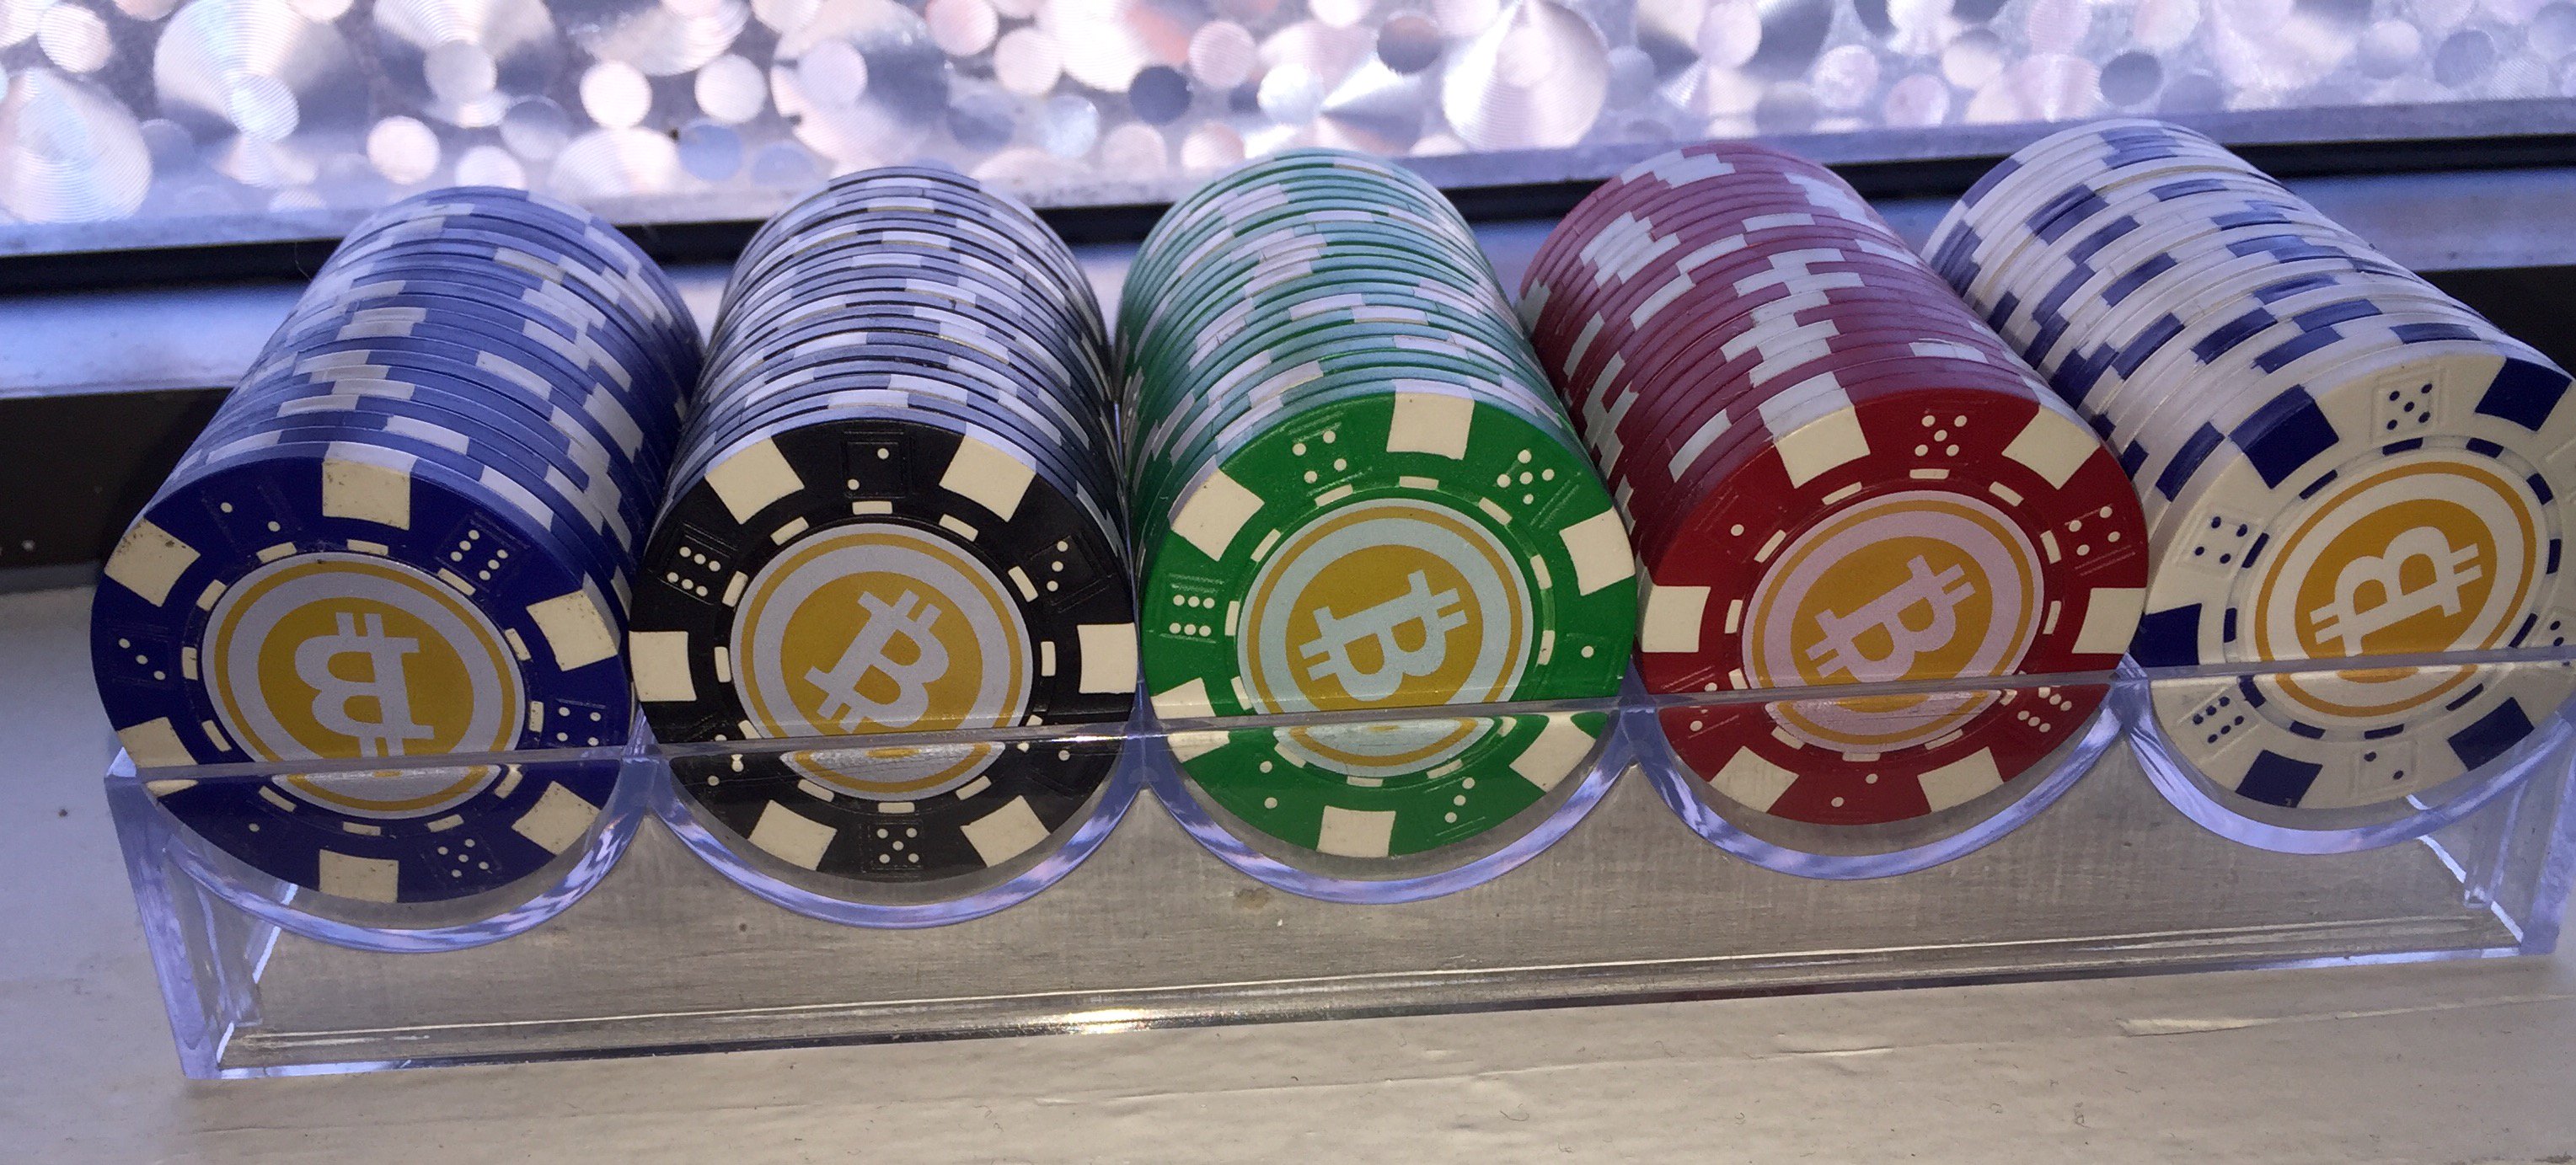 Purse ⚡️ on "Ooooh! Look what we just got: #Bitcoin Poker Chips - https://t.co/YIYQJaDKGQ Purchased Purse Merchants for #BTC https://t.co/DApLaUVTsV" / Twitter